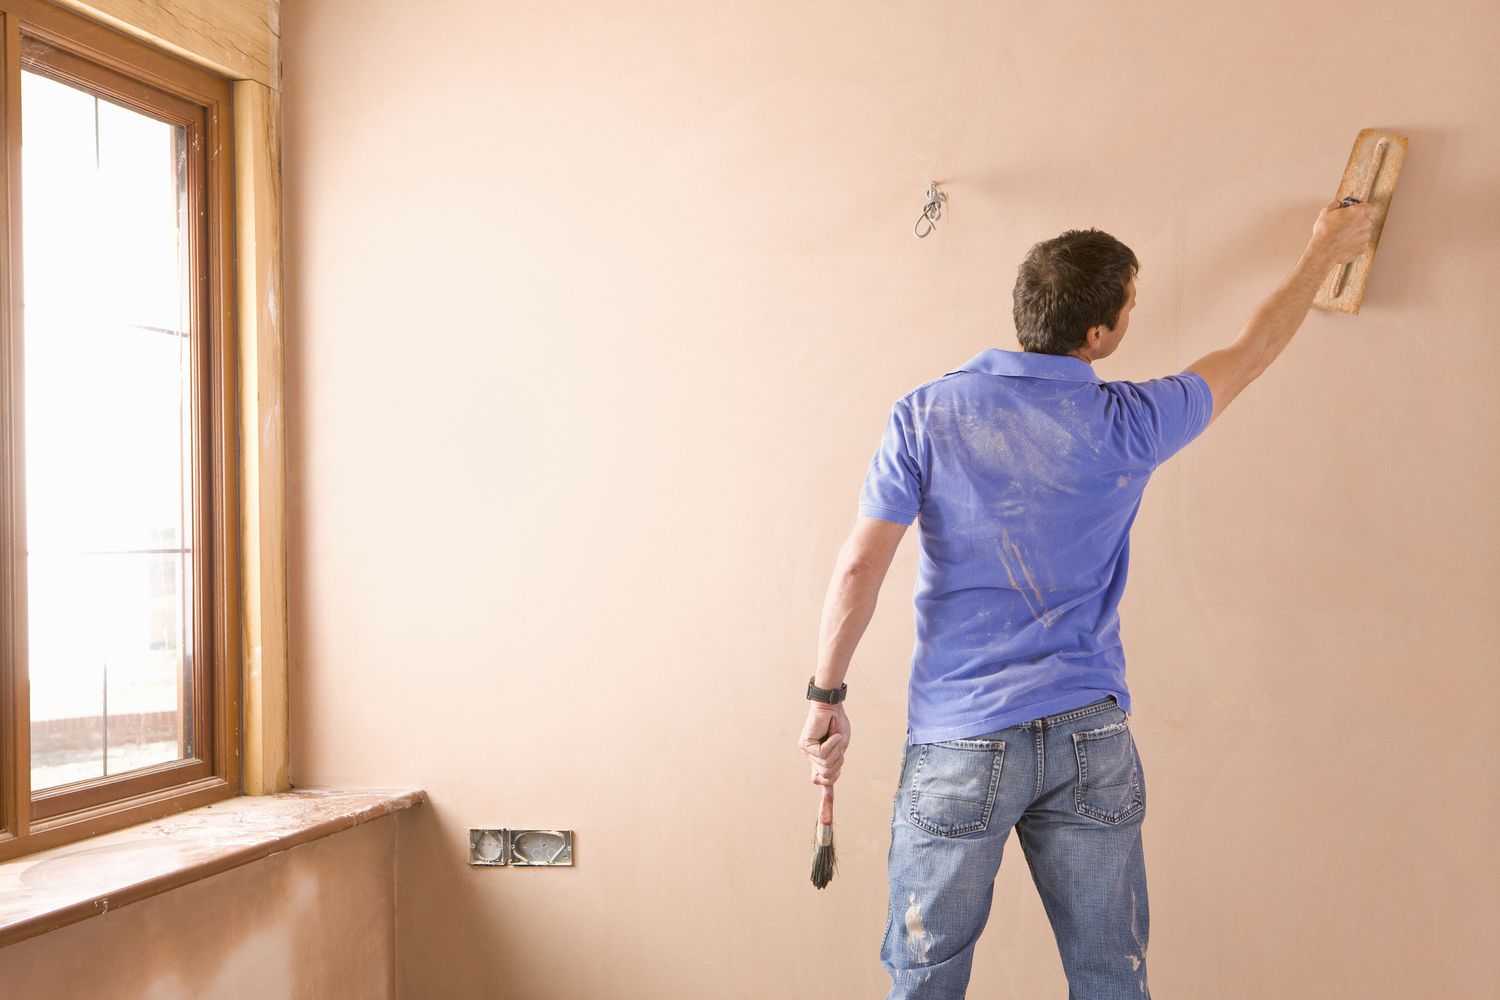 Are You Interested Learn Applying a Venetian Plaster Wall Finish?